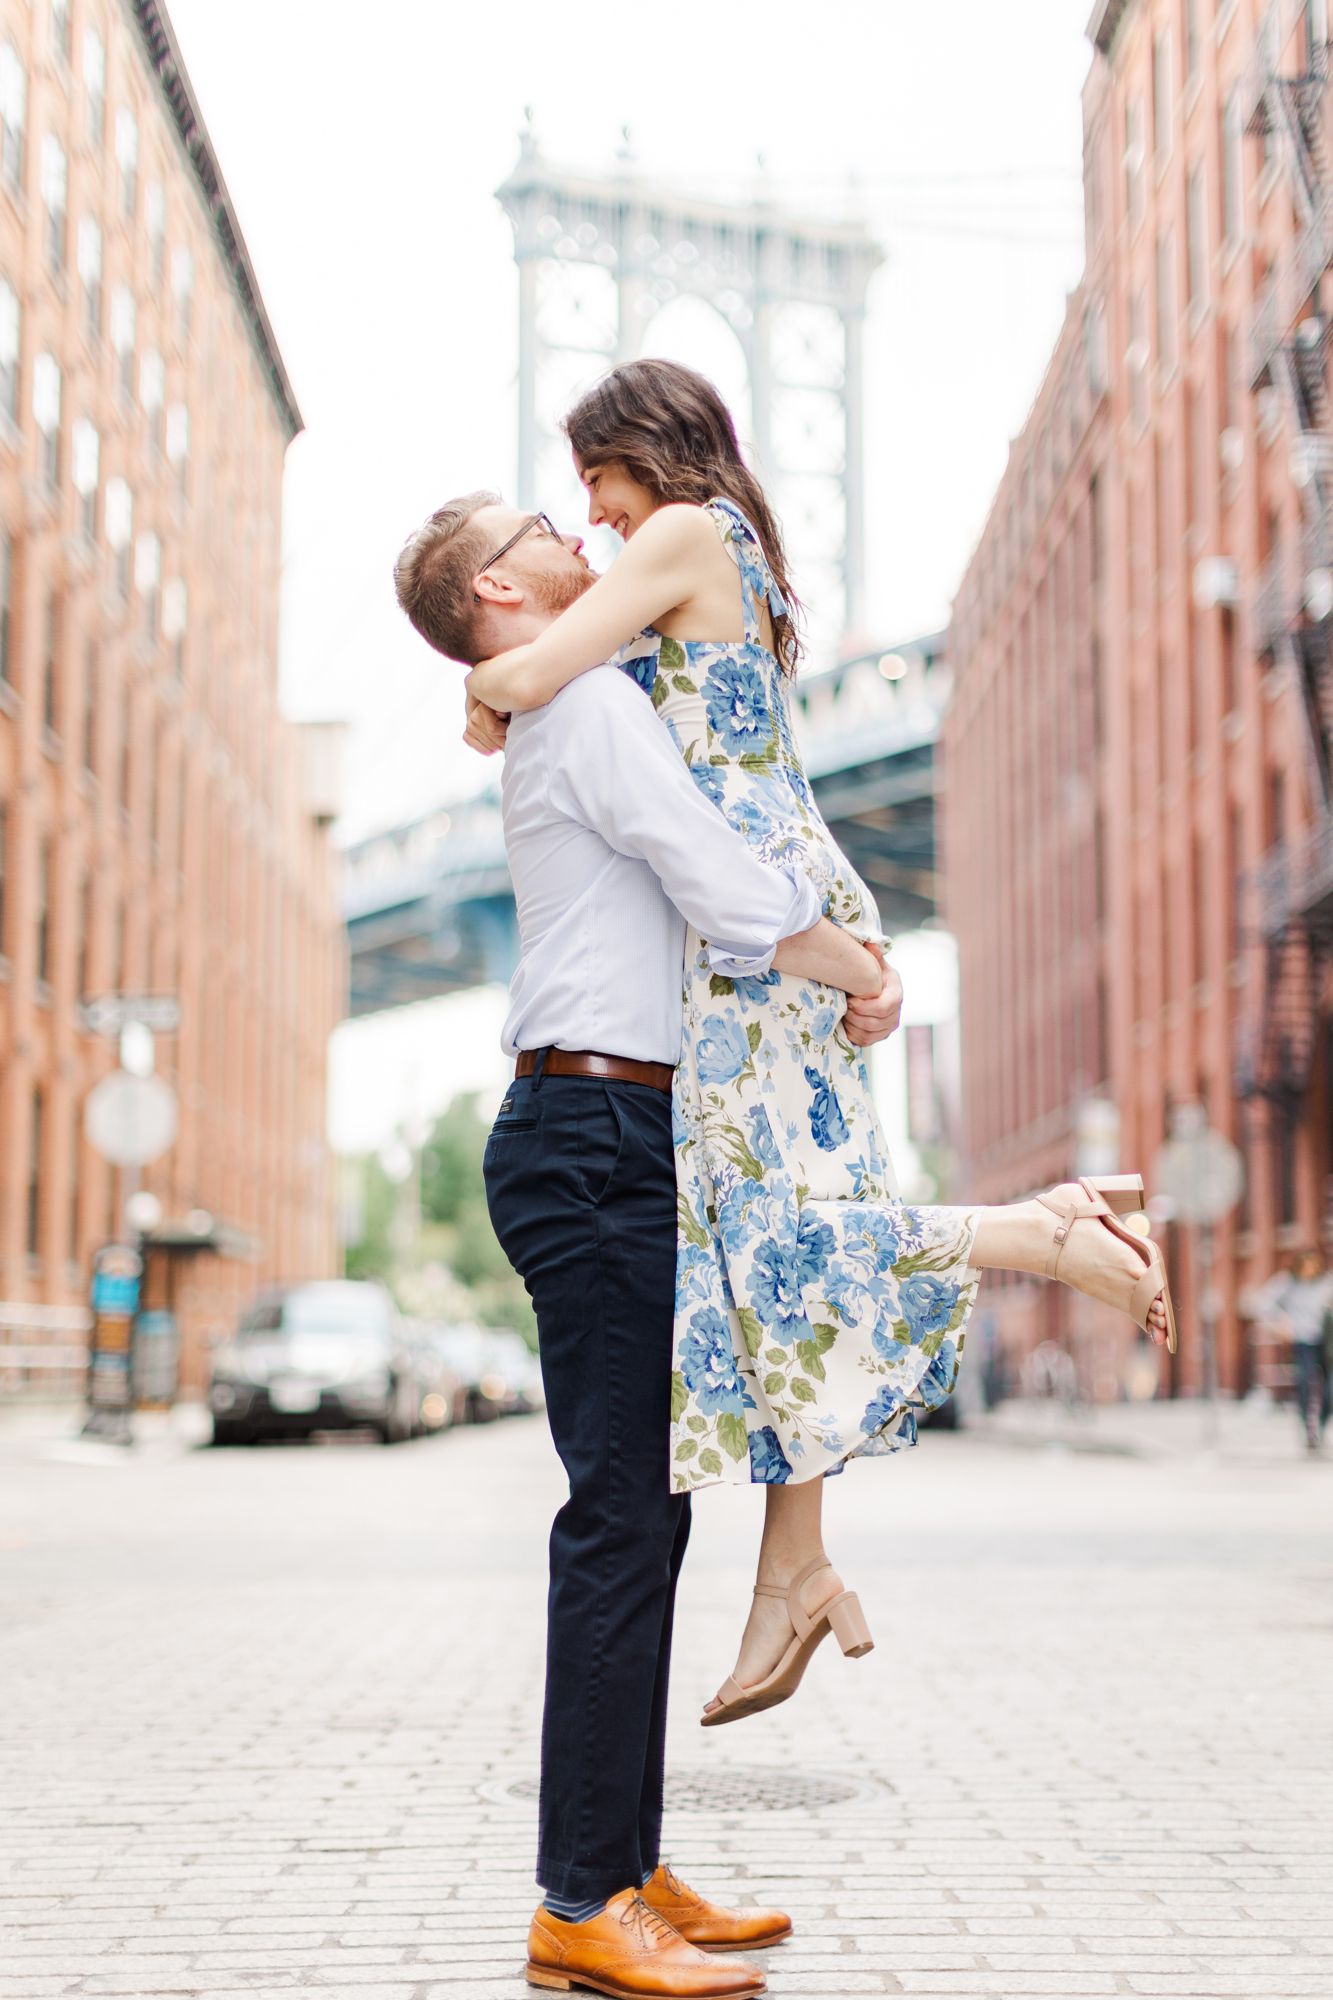 Terrific Engagement Photos in Brooklyn Heights